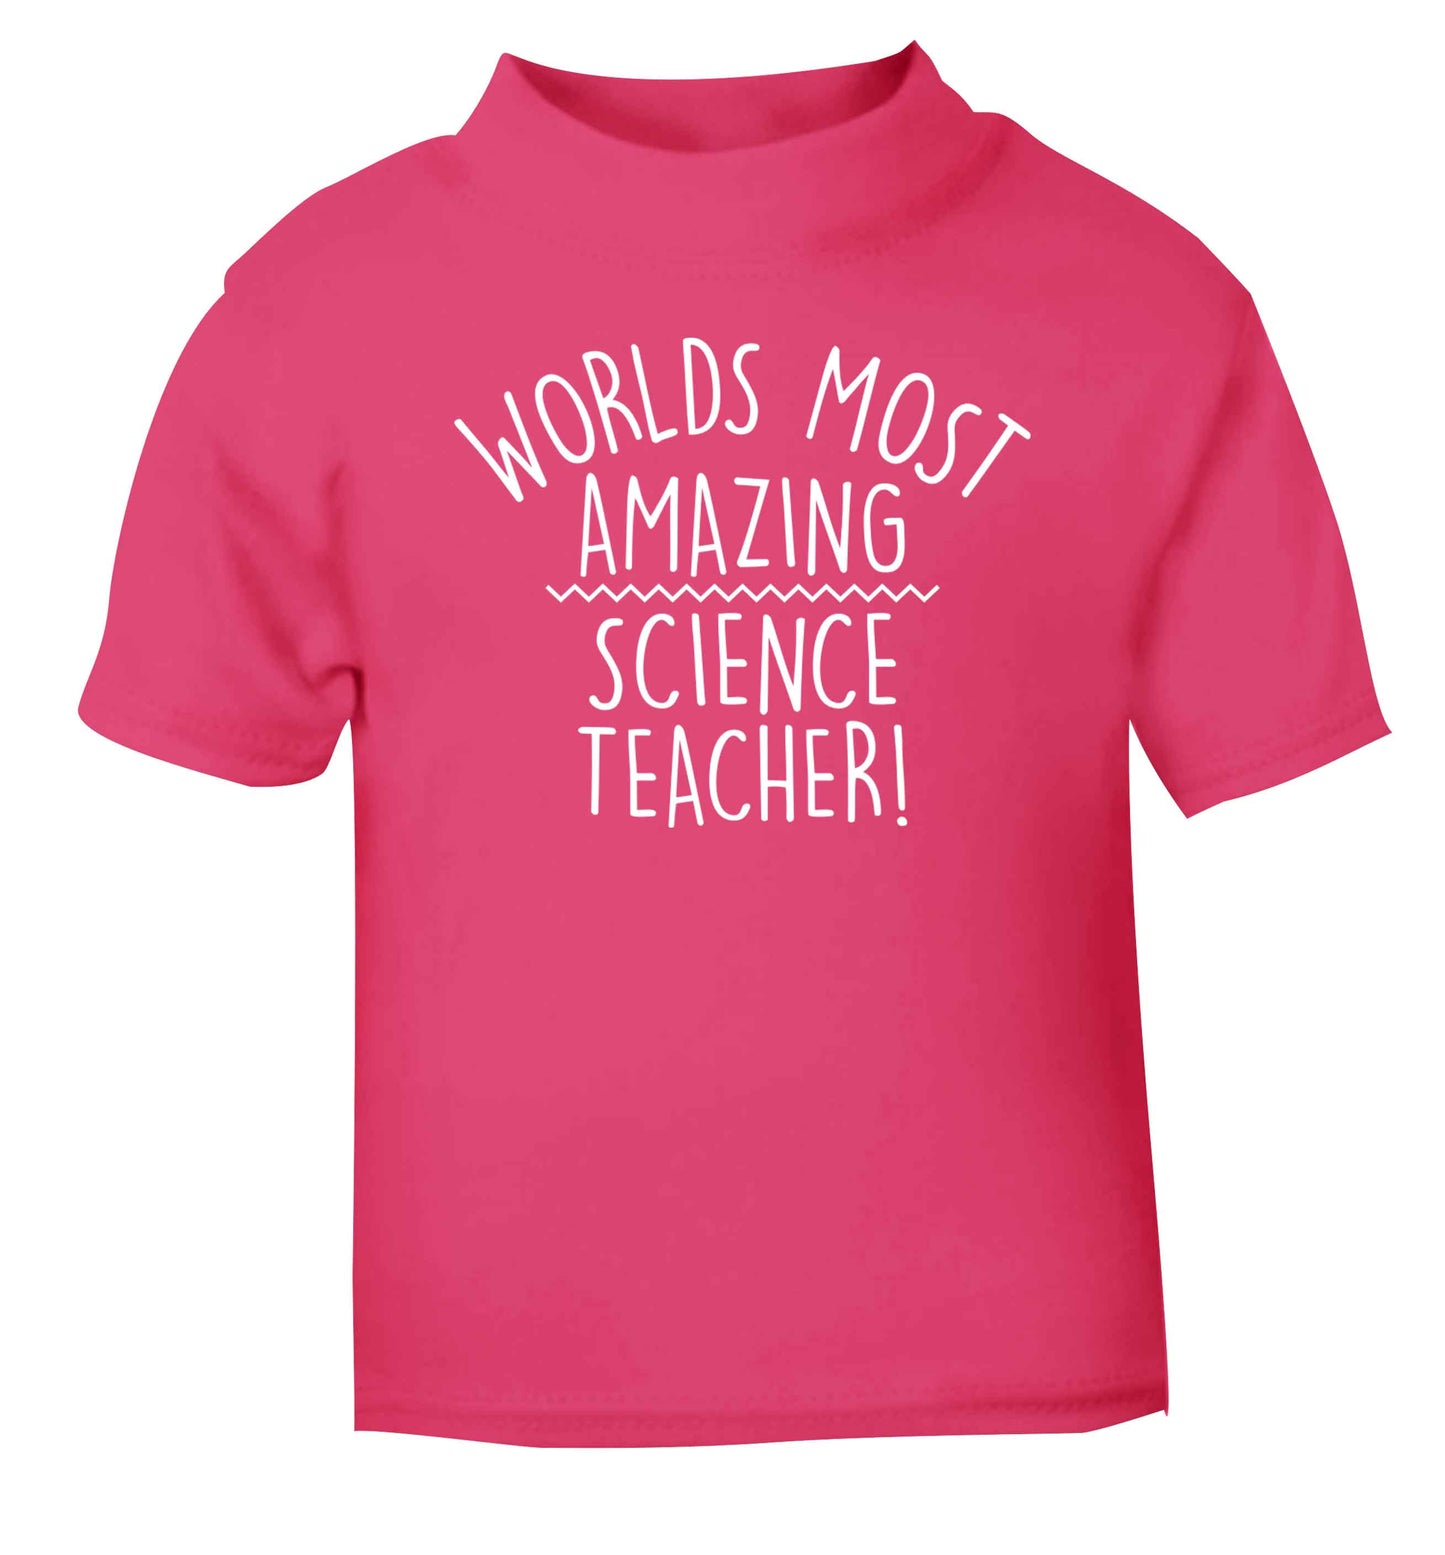 Worlds most amazing science teacher pink baby toddler Tshirt 2 Years